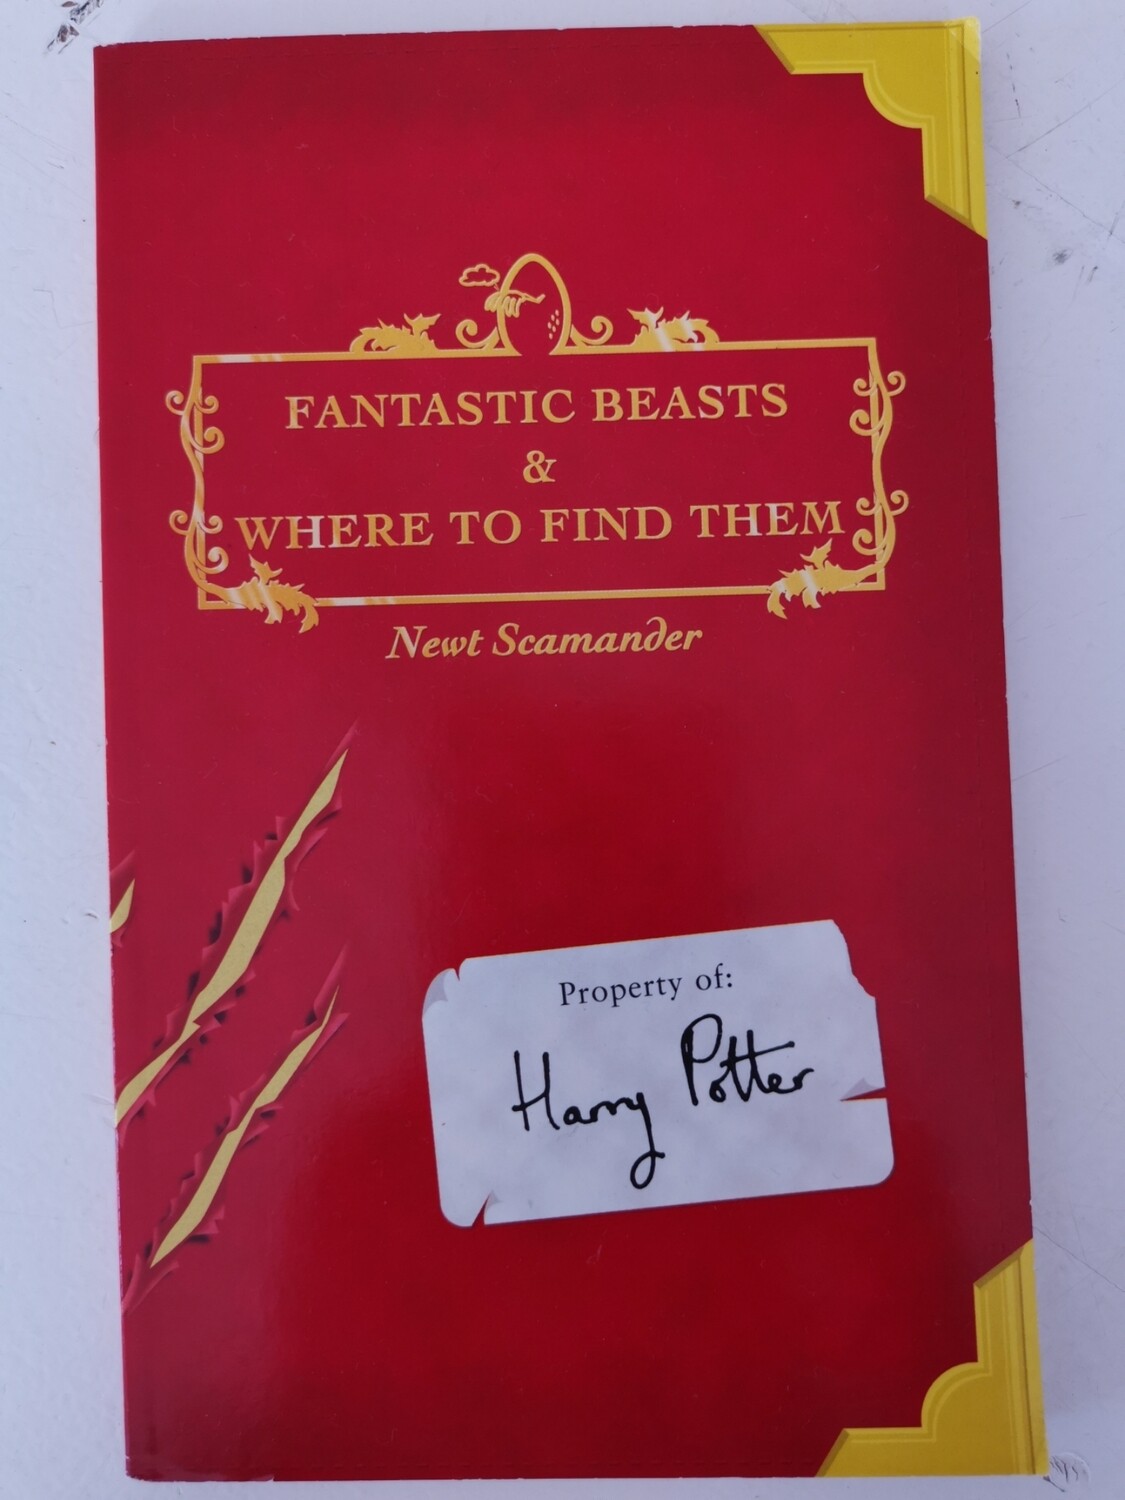 Fantastic beasts and where to find them, J K Rowling